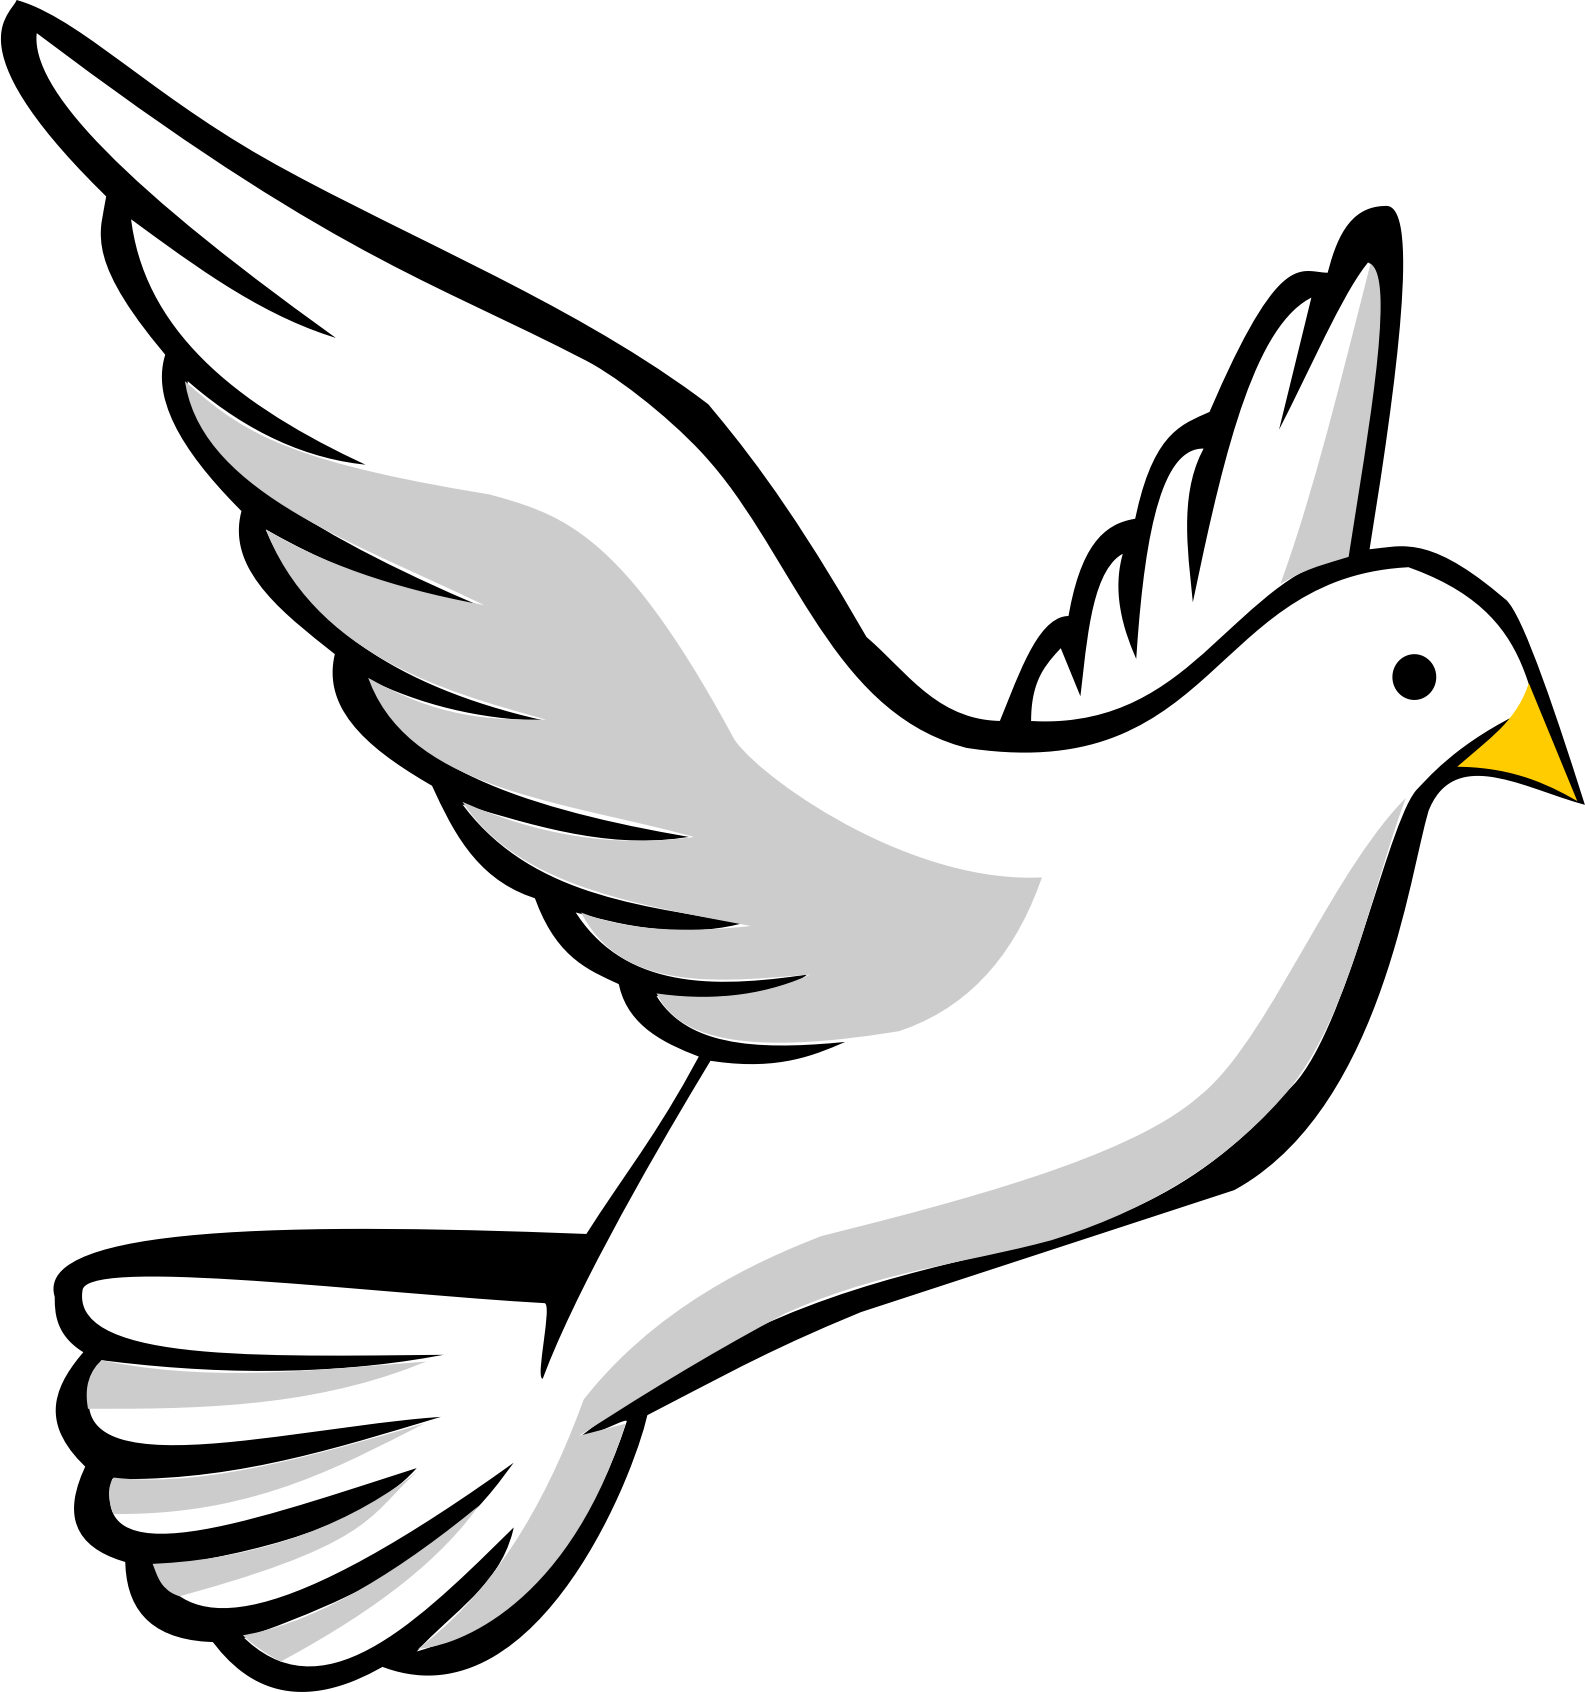 Dove . Wing clipart flying